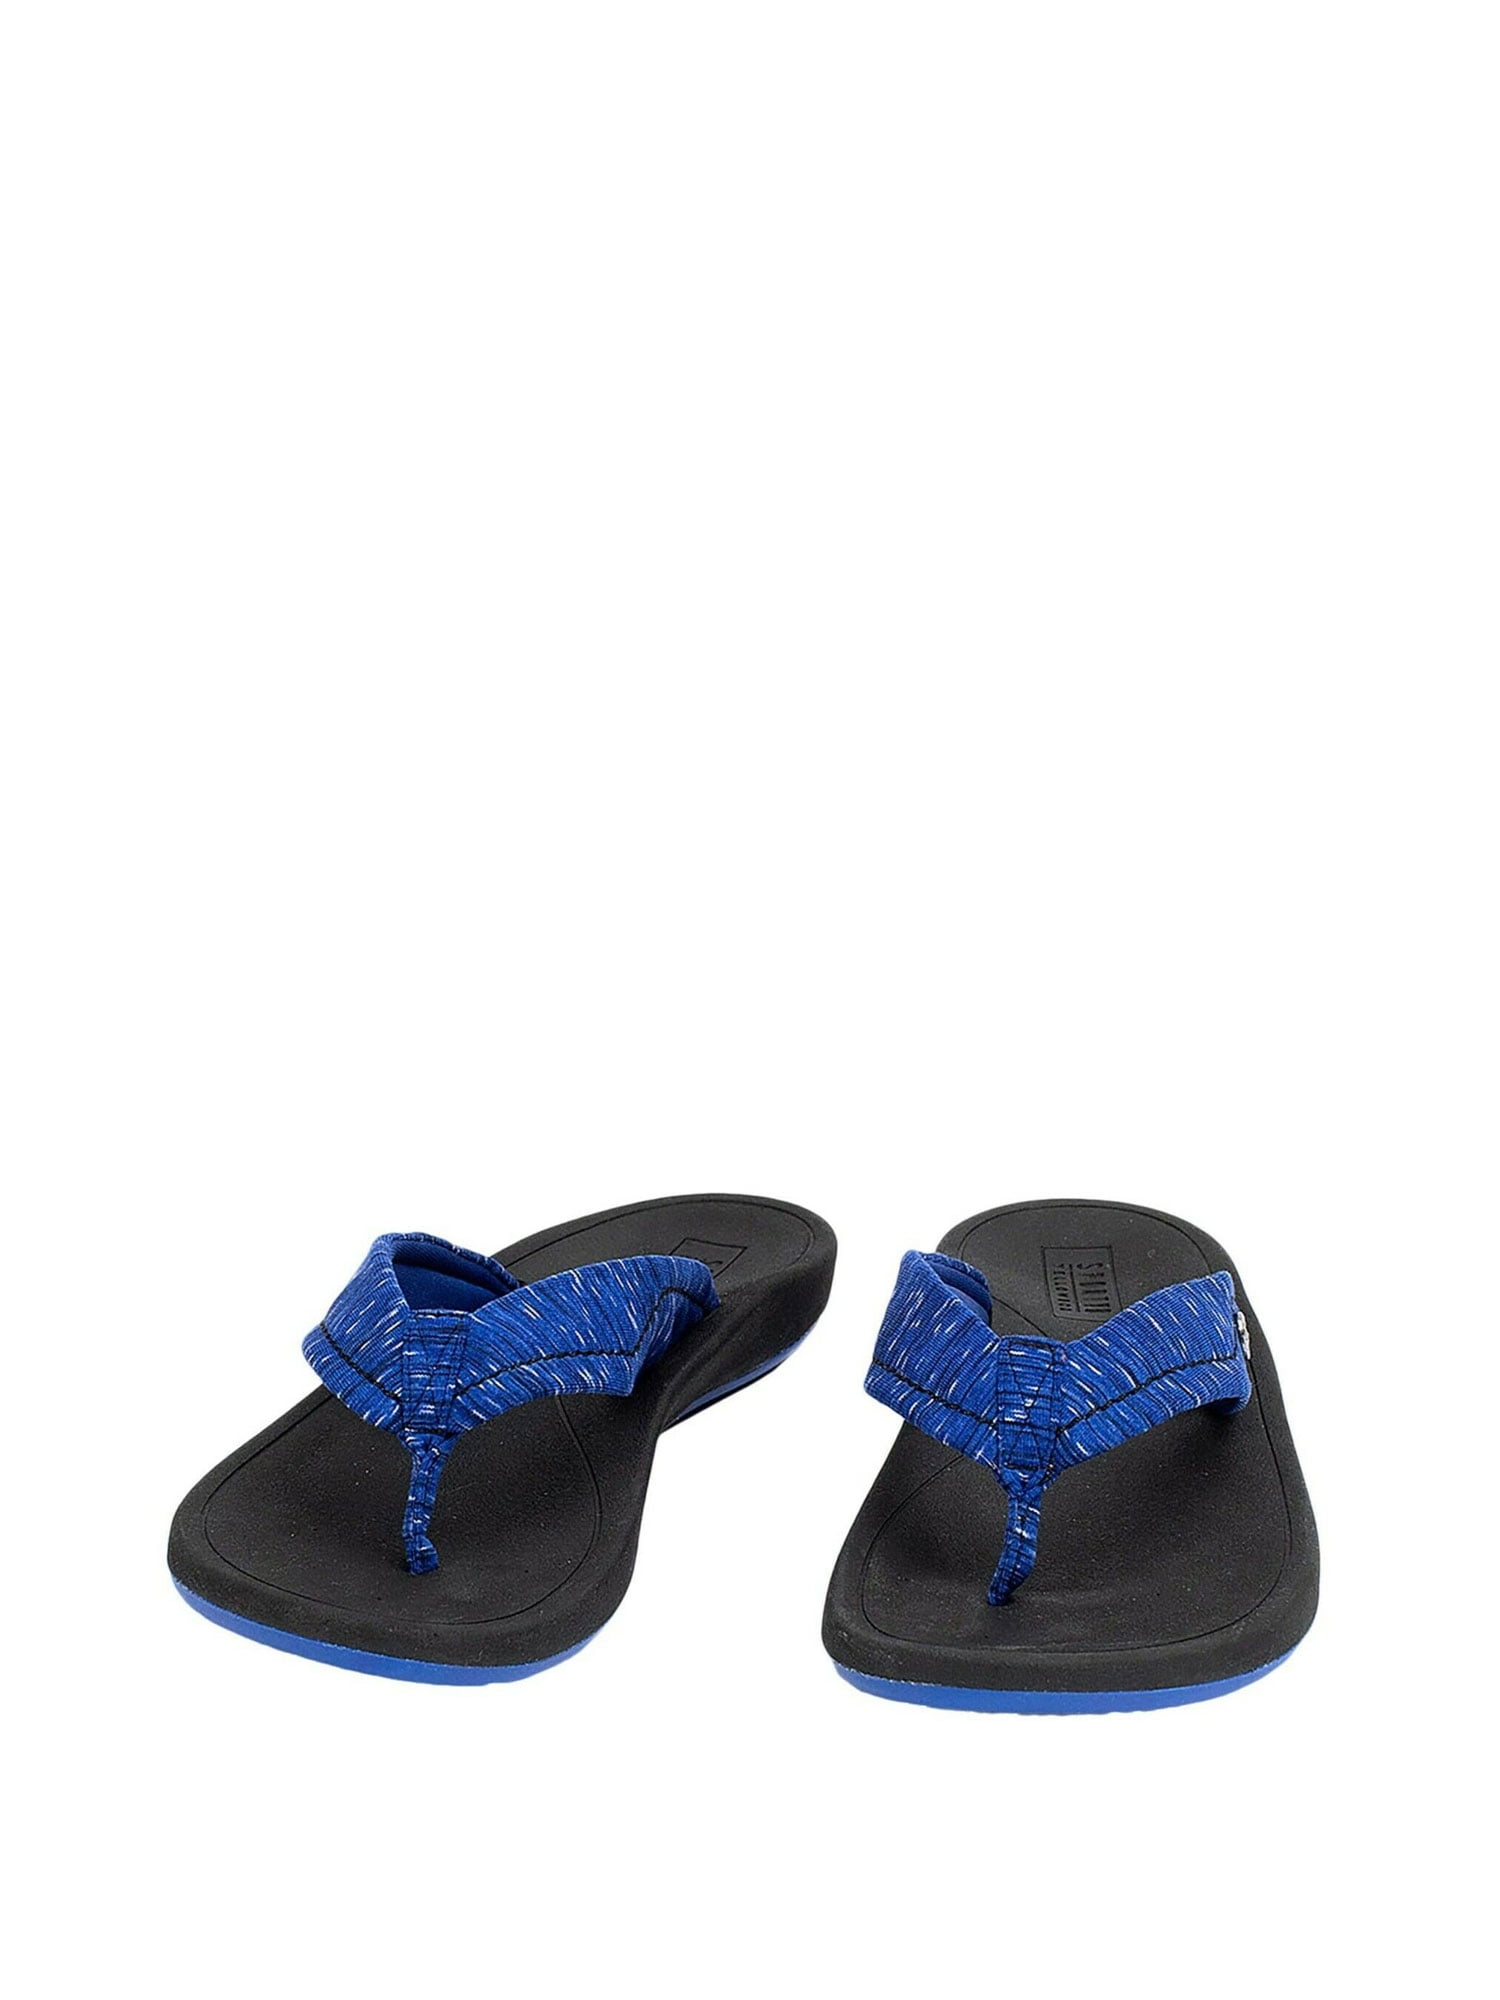 flip flops with fabric toe post